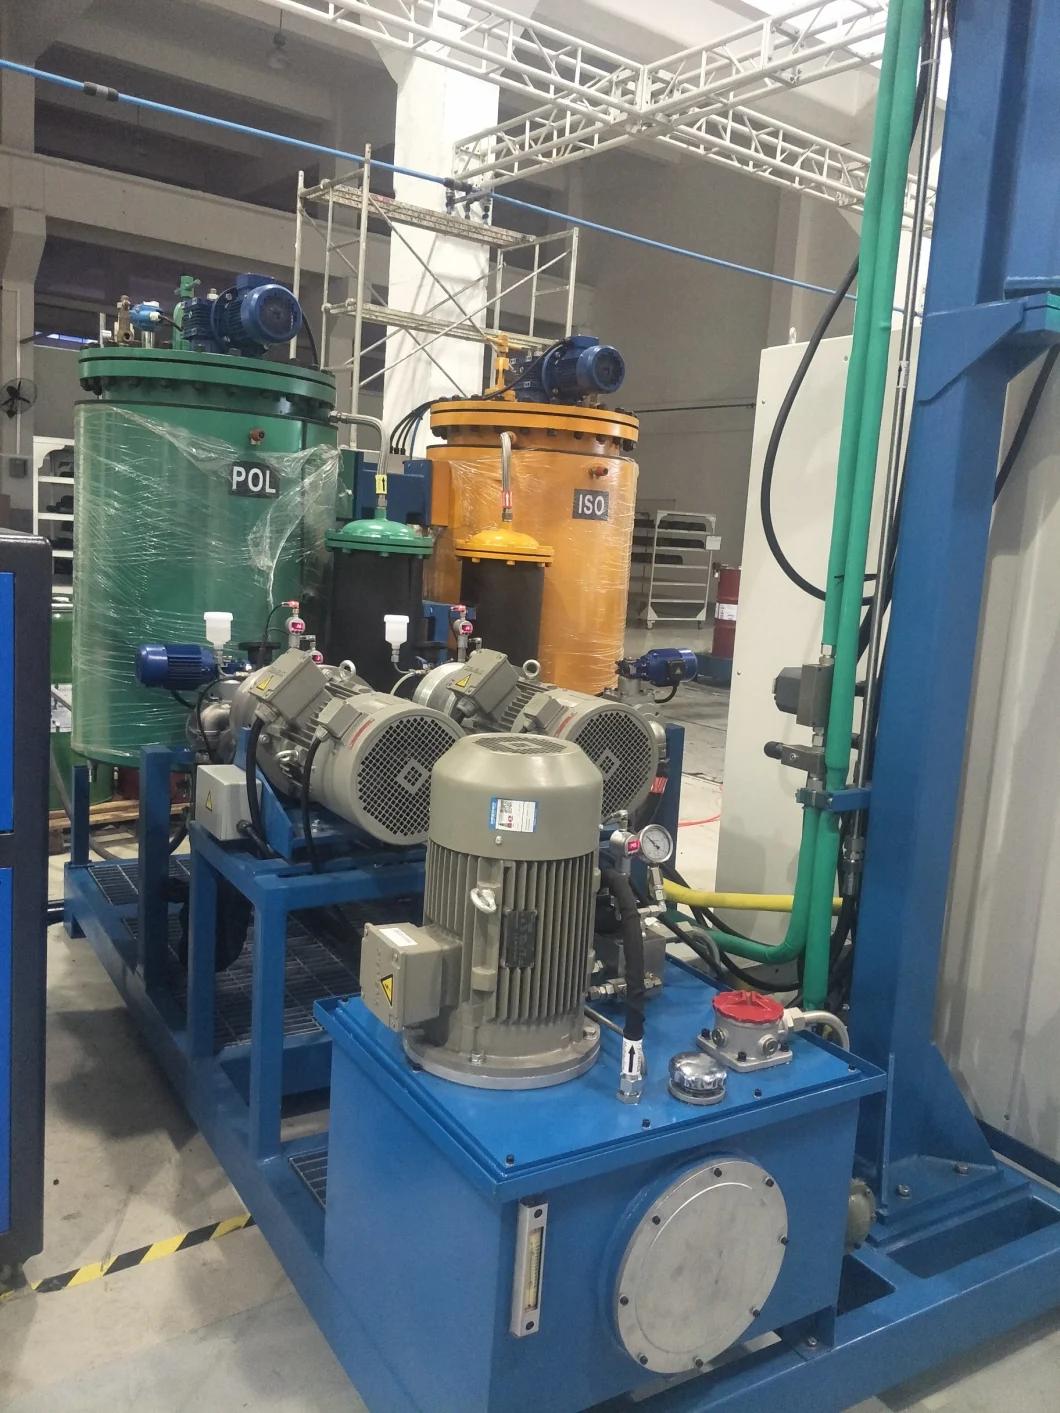 High Pressure Foaming Machine for Cooler Box with Agent Spray System